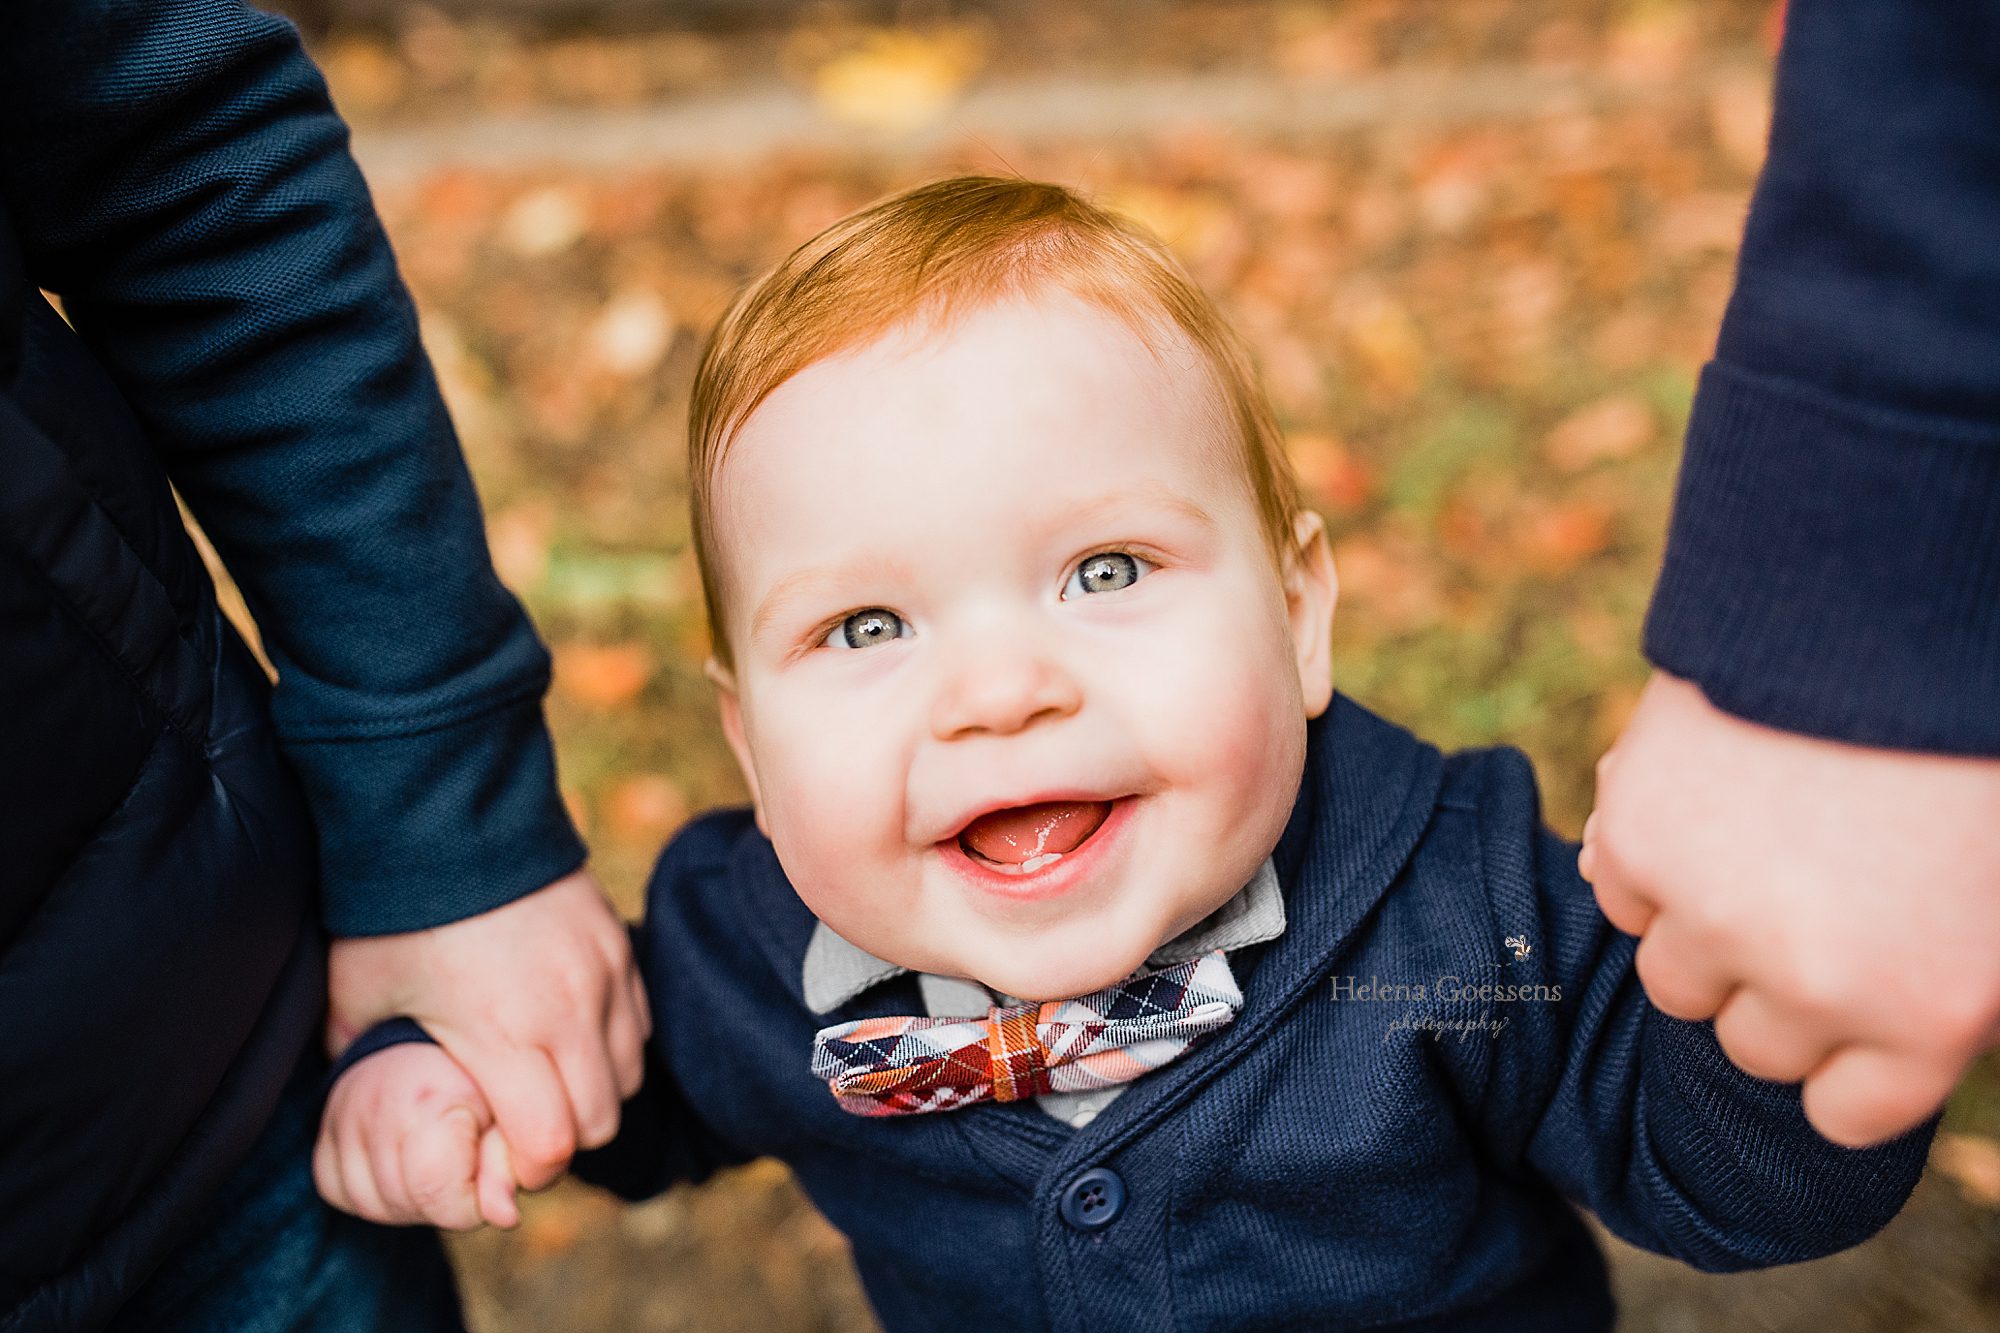 young baby during family portraits with Helena Goessens at Larz Anderson Park